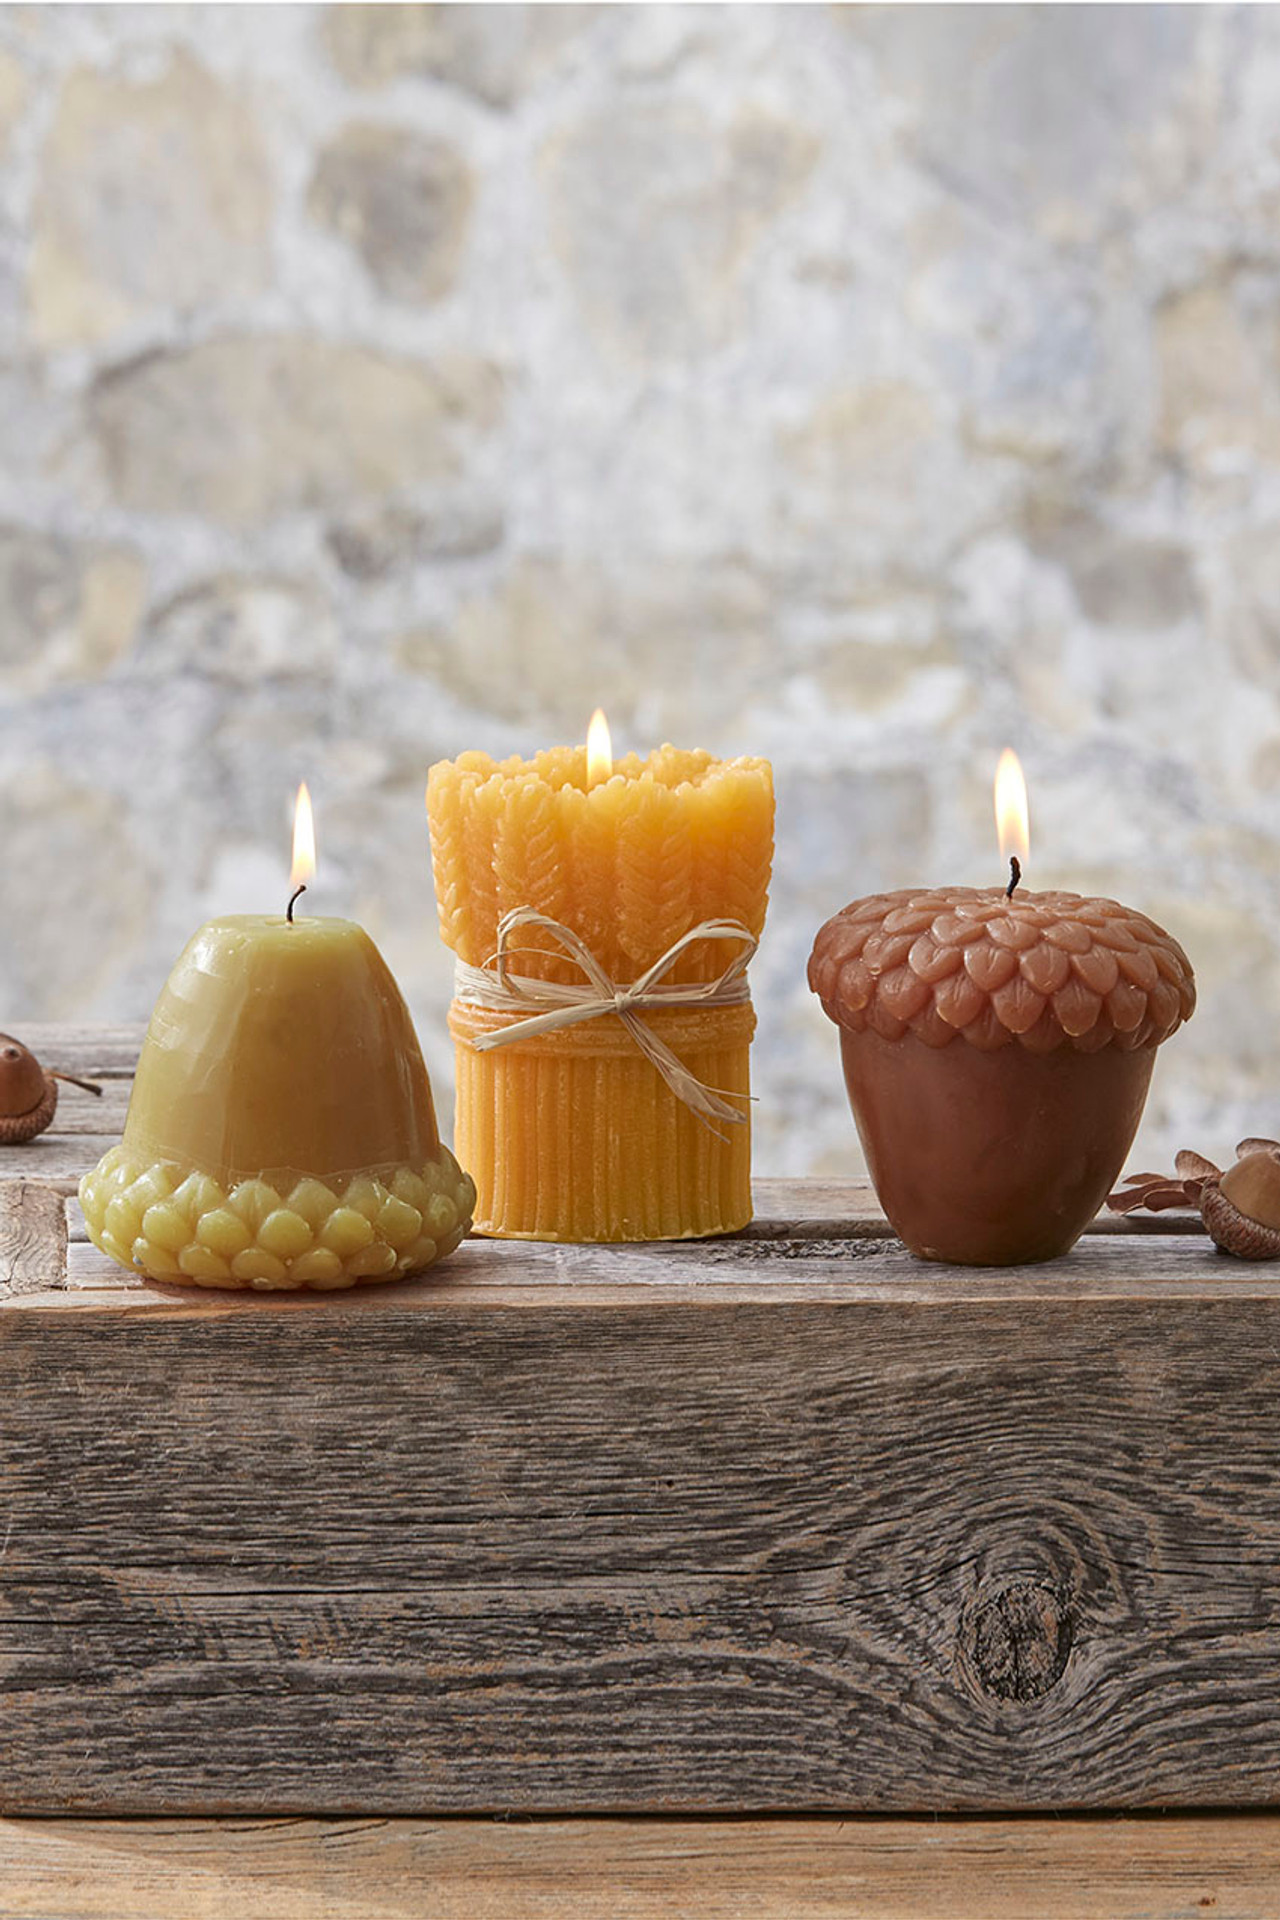 How To Make A Beeswax Candle  Beeswax Candle Making Tutorial - Cosy Owl